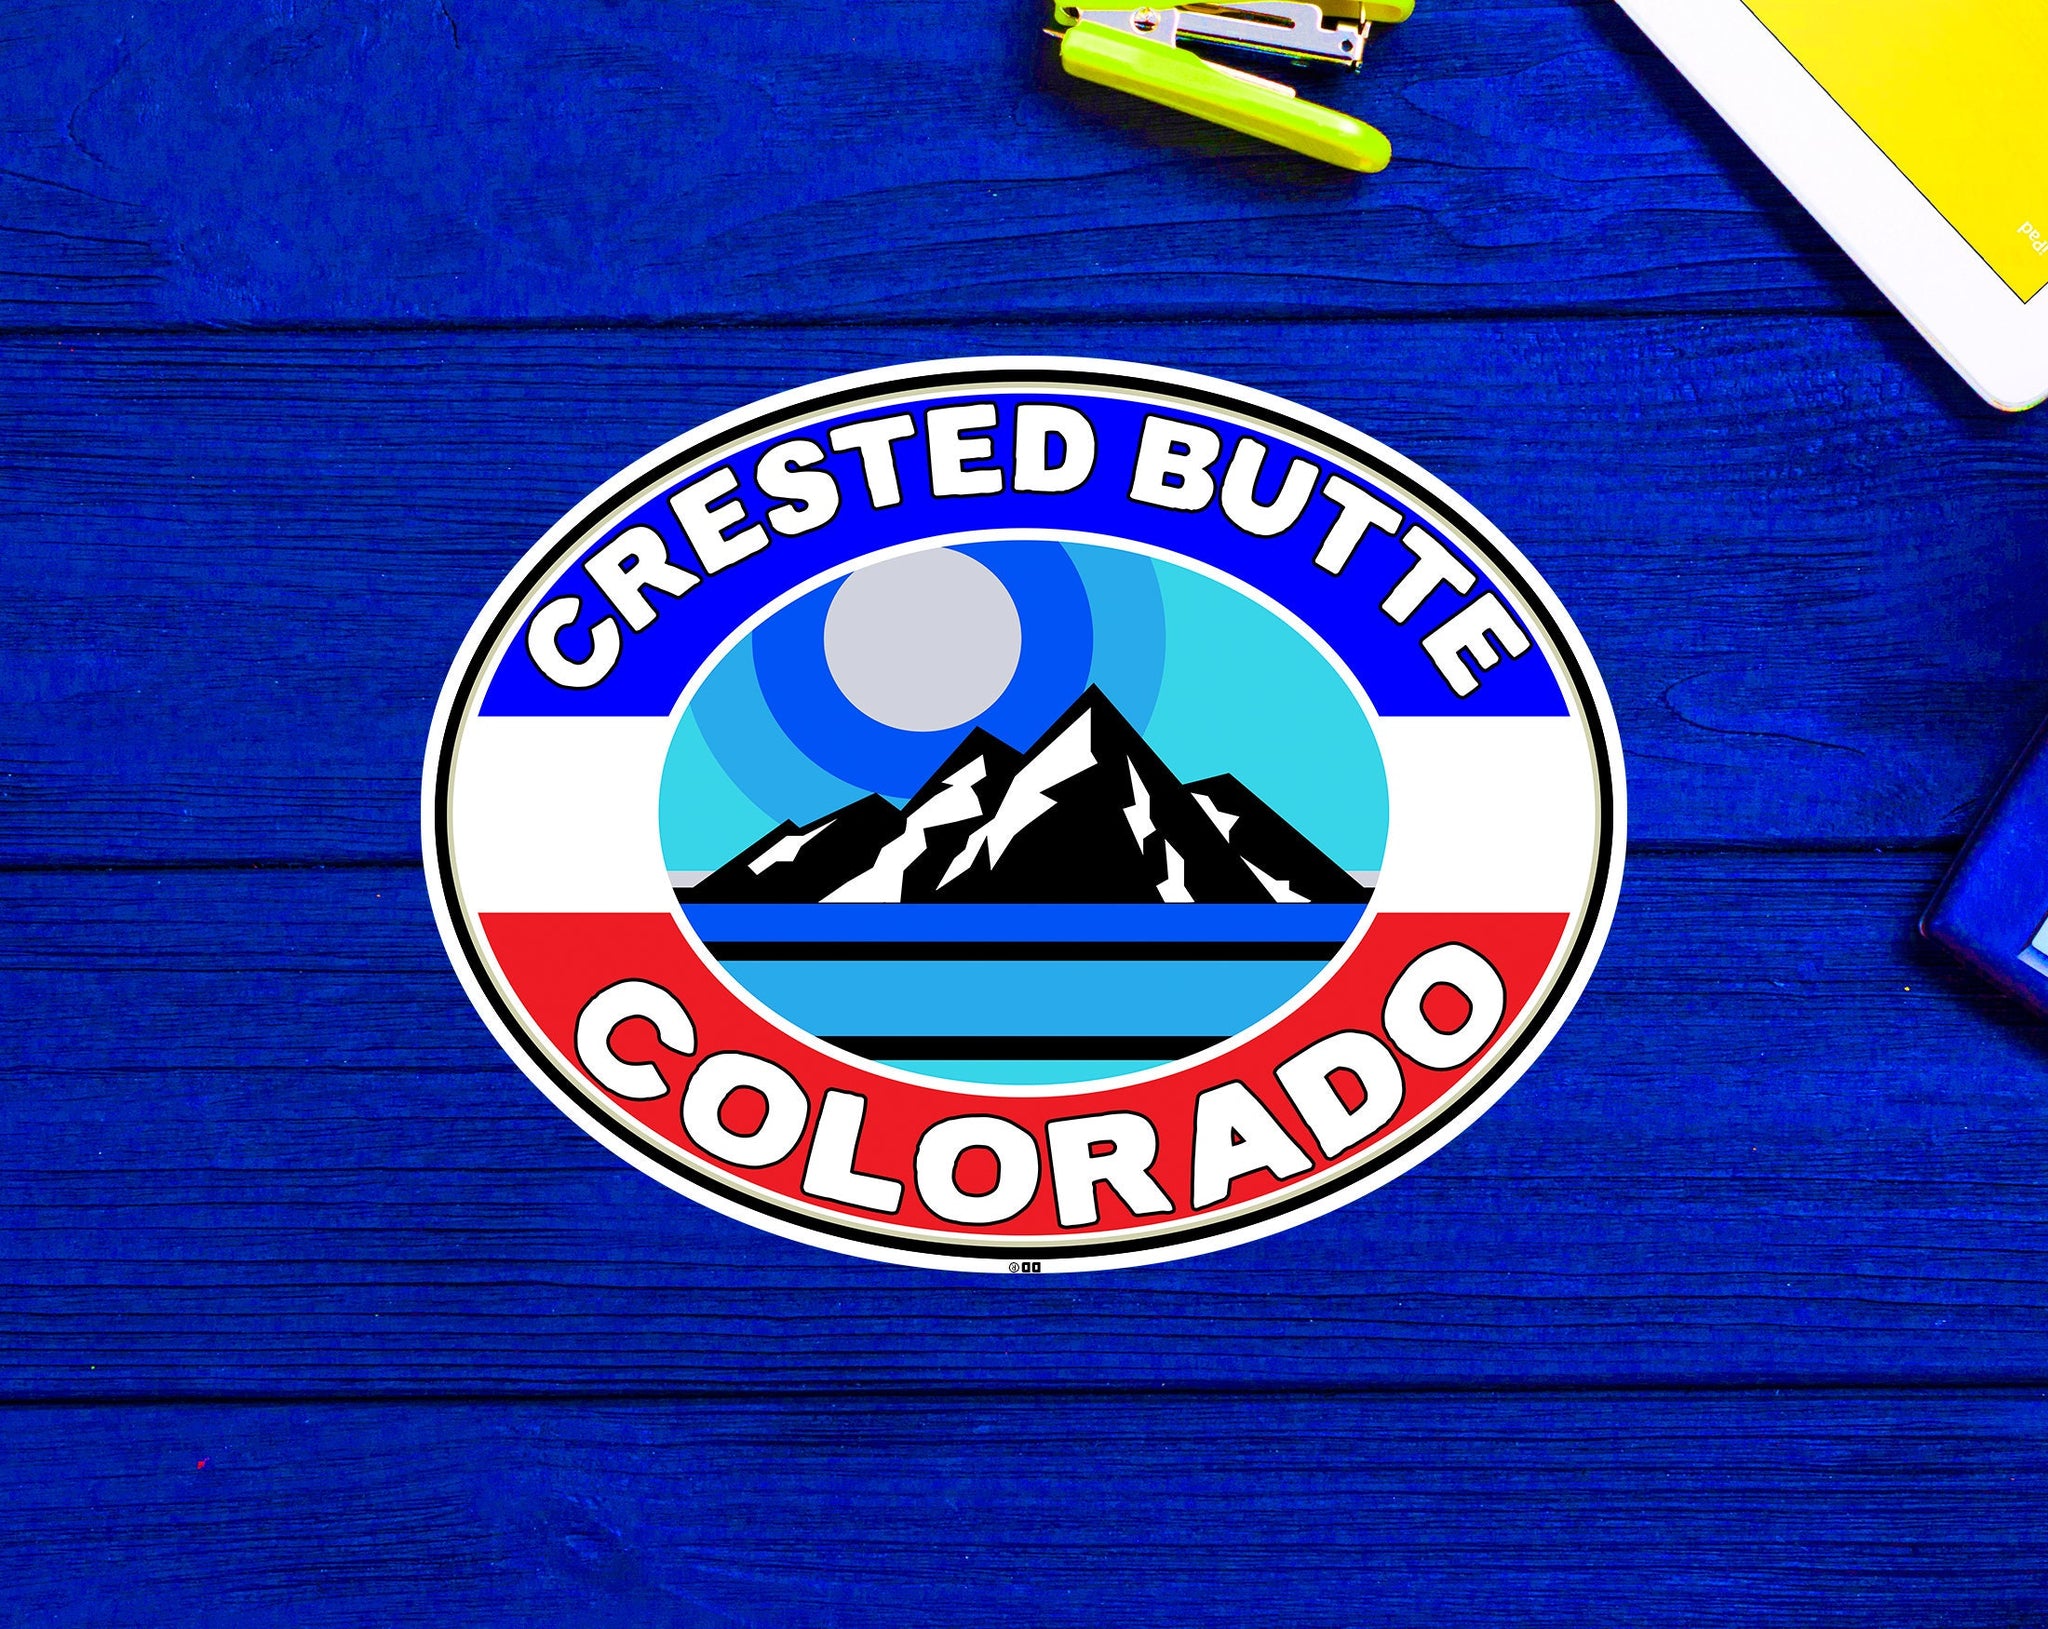 Crested Butte Colorado Skiing Decal Sticker 3.75" Vinyl Laptop Bumper Luggage